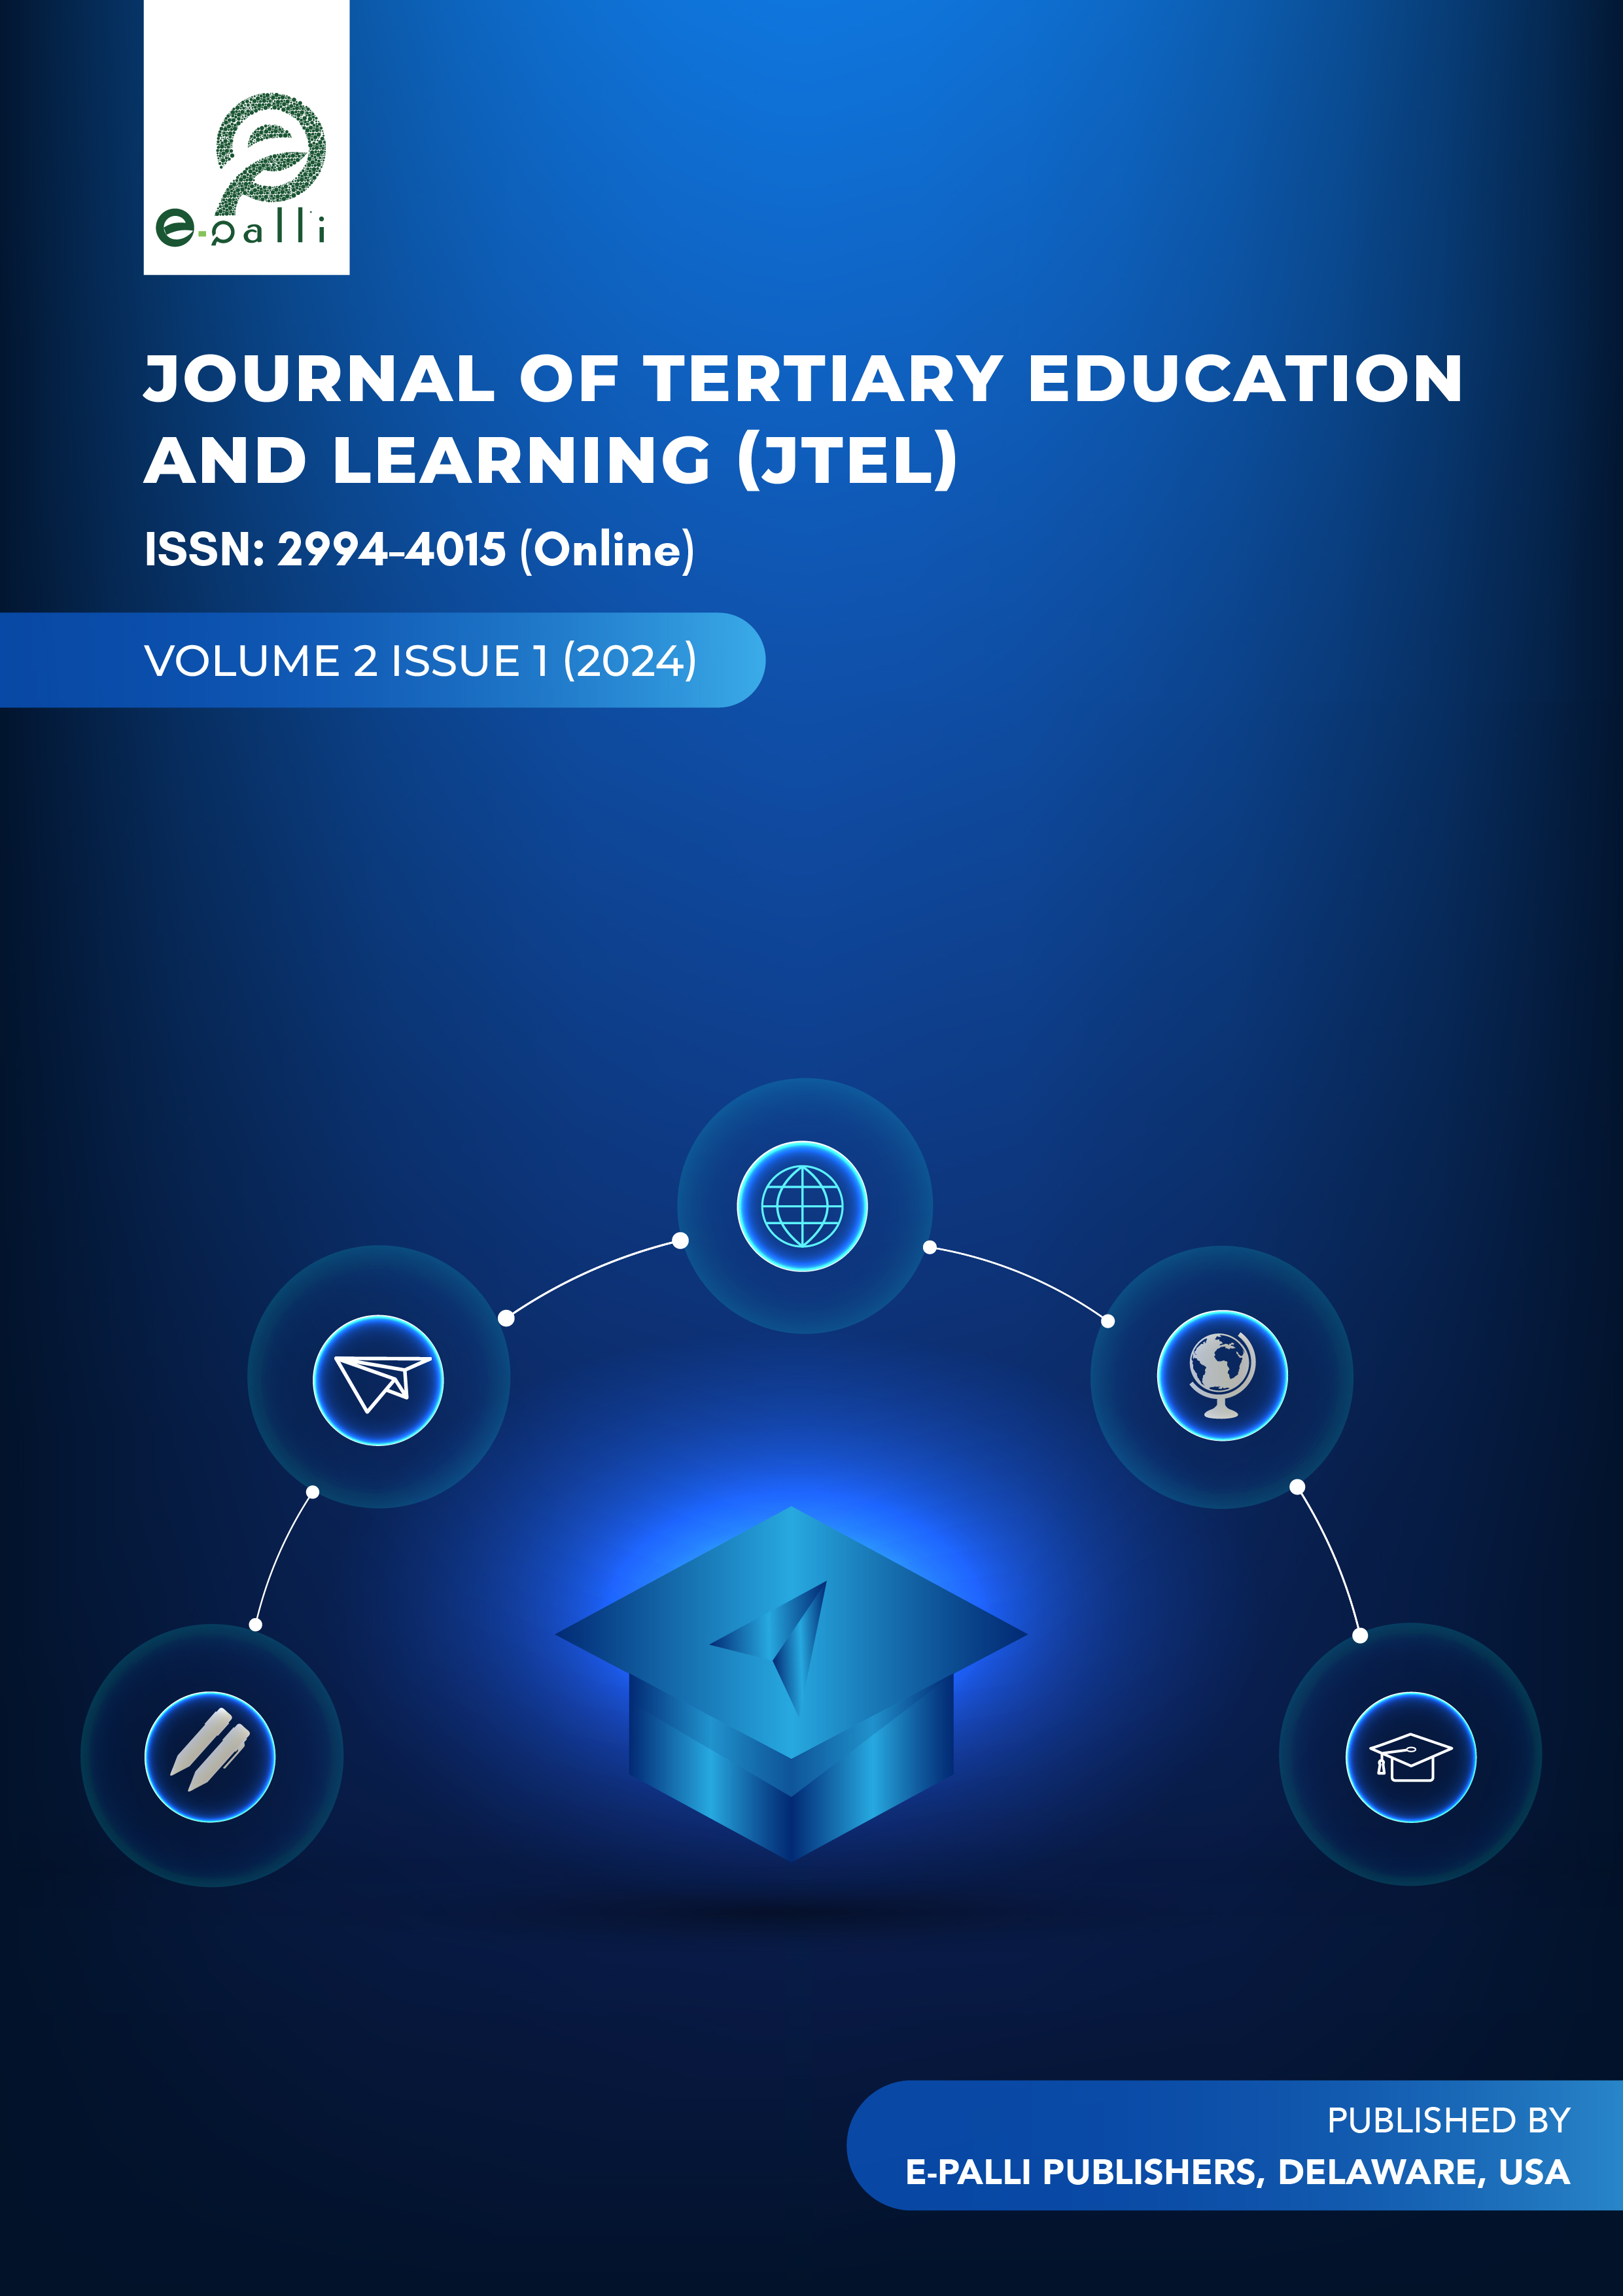                     View Vol. 2 No. 1 (2024): Journal of Tertiary Education and Learning
                